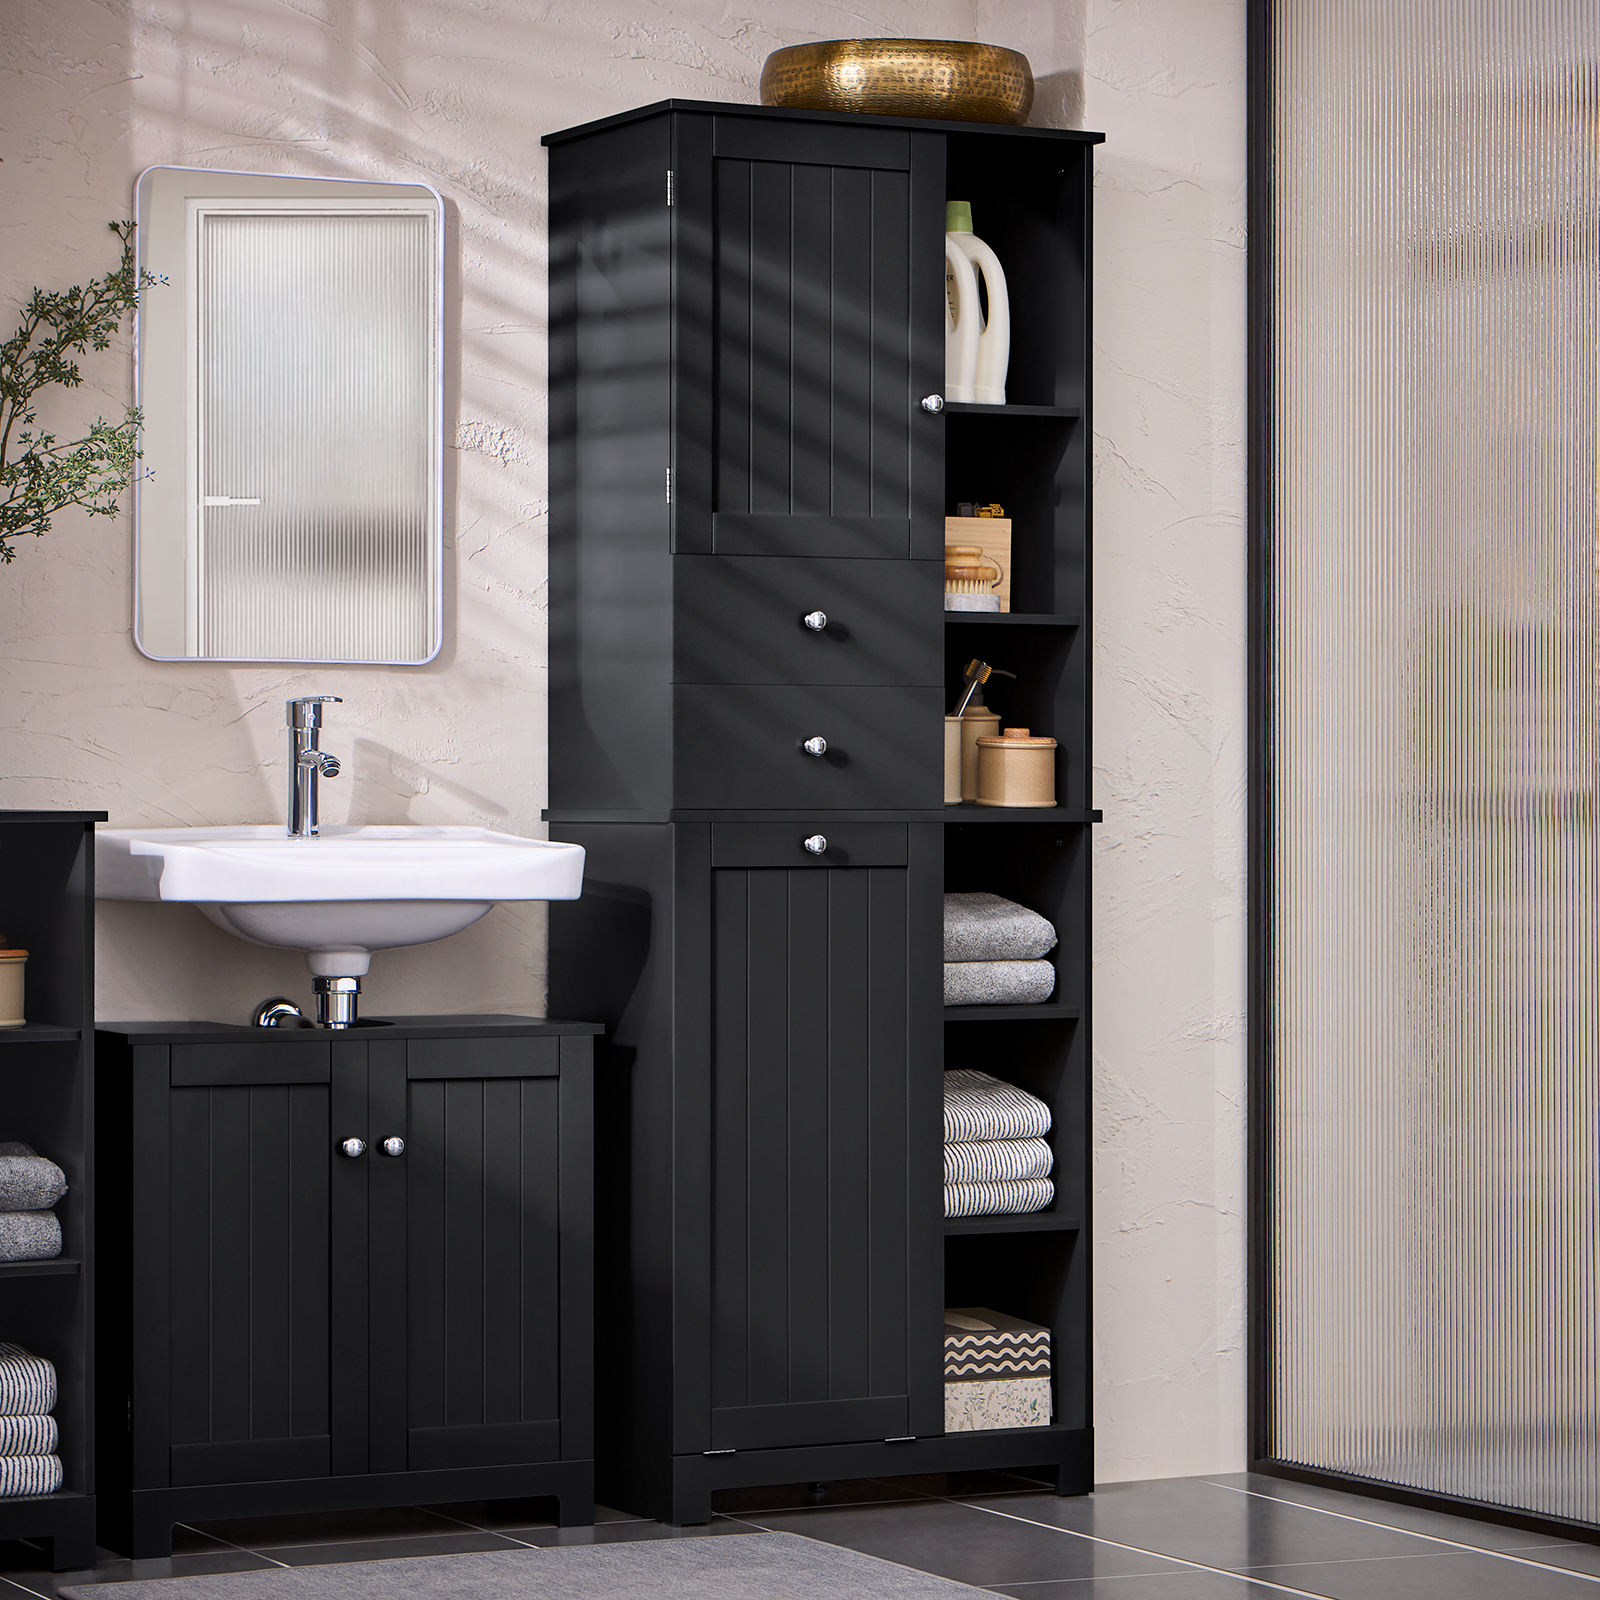 SoBuy Bathroom Tall Cupboard Storage Cabinet with Laundry Basket Laundry Chest BZR104-SCH